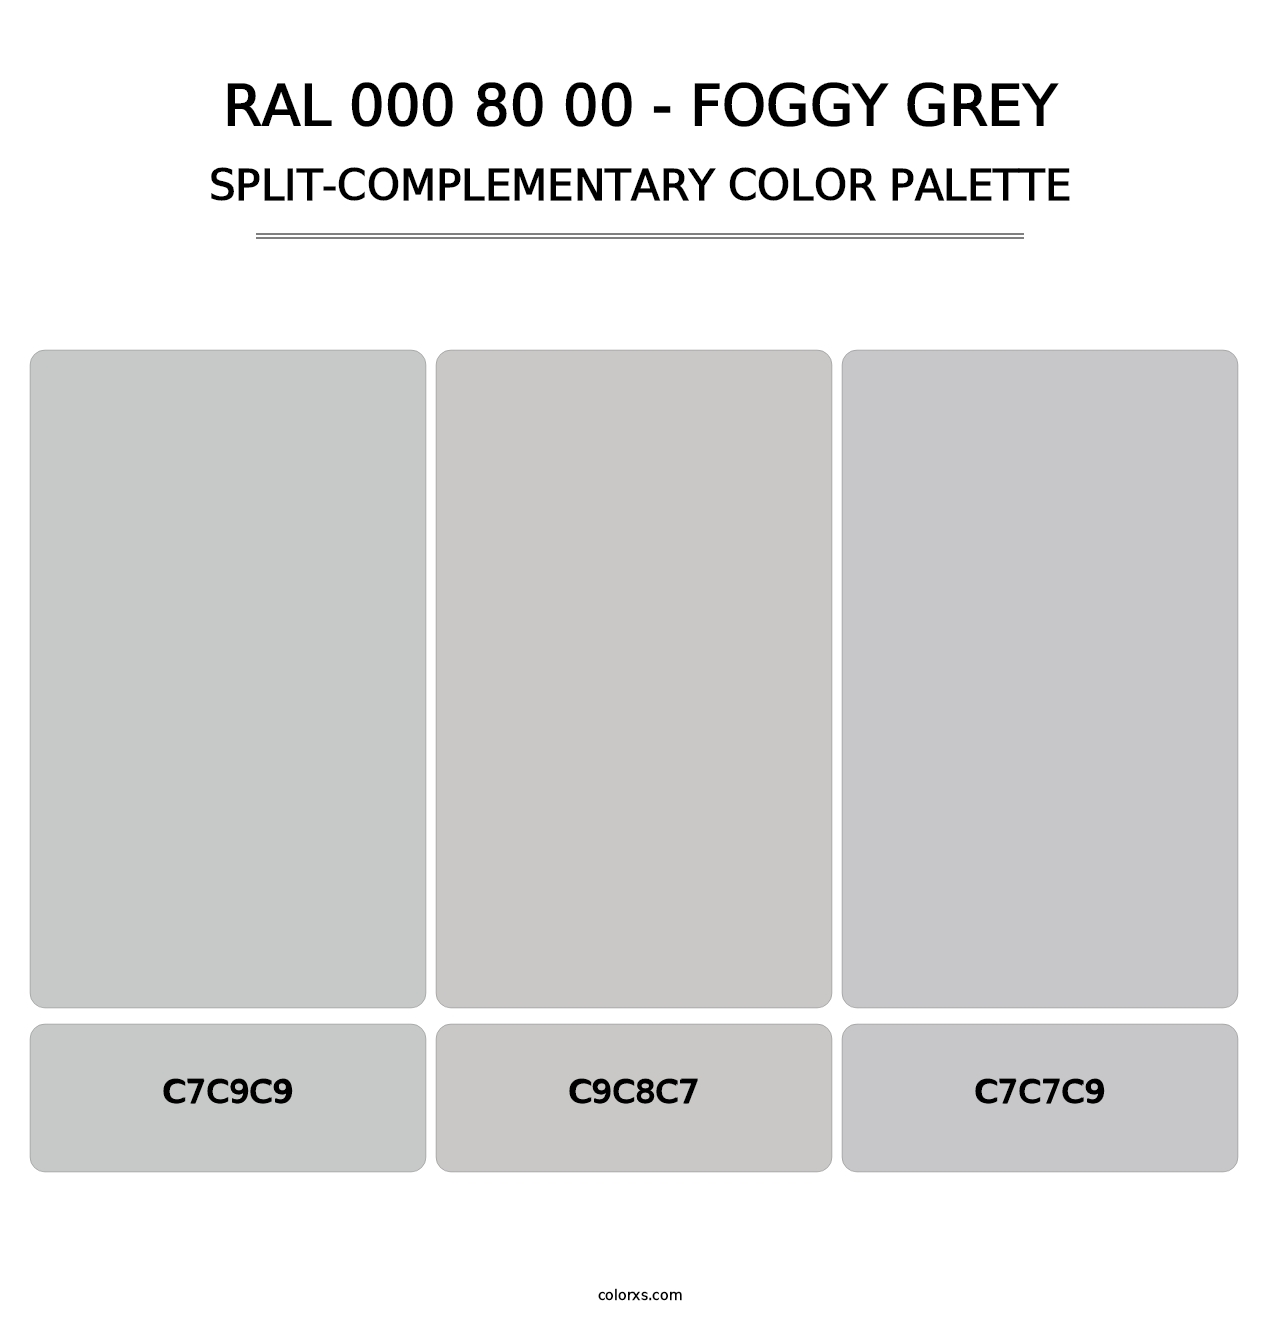 RAL 000 80 00 - Foggy Grey - Split-Complementary Color Palette